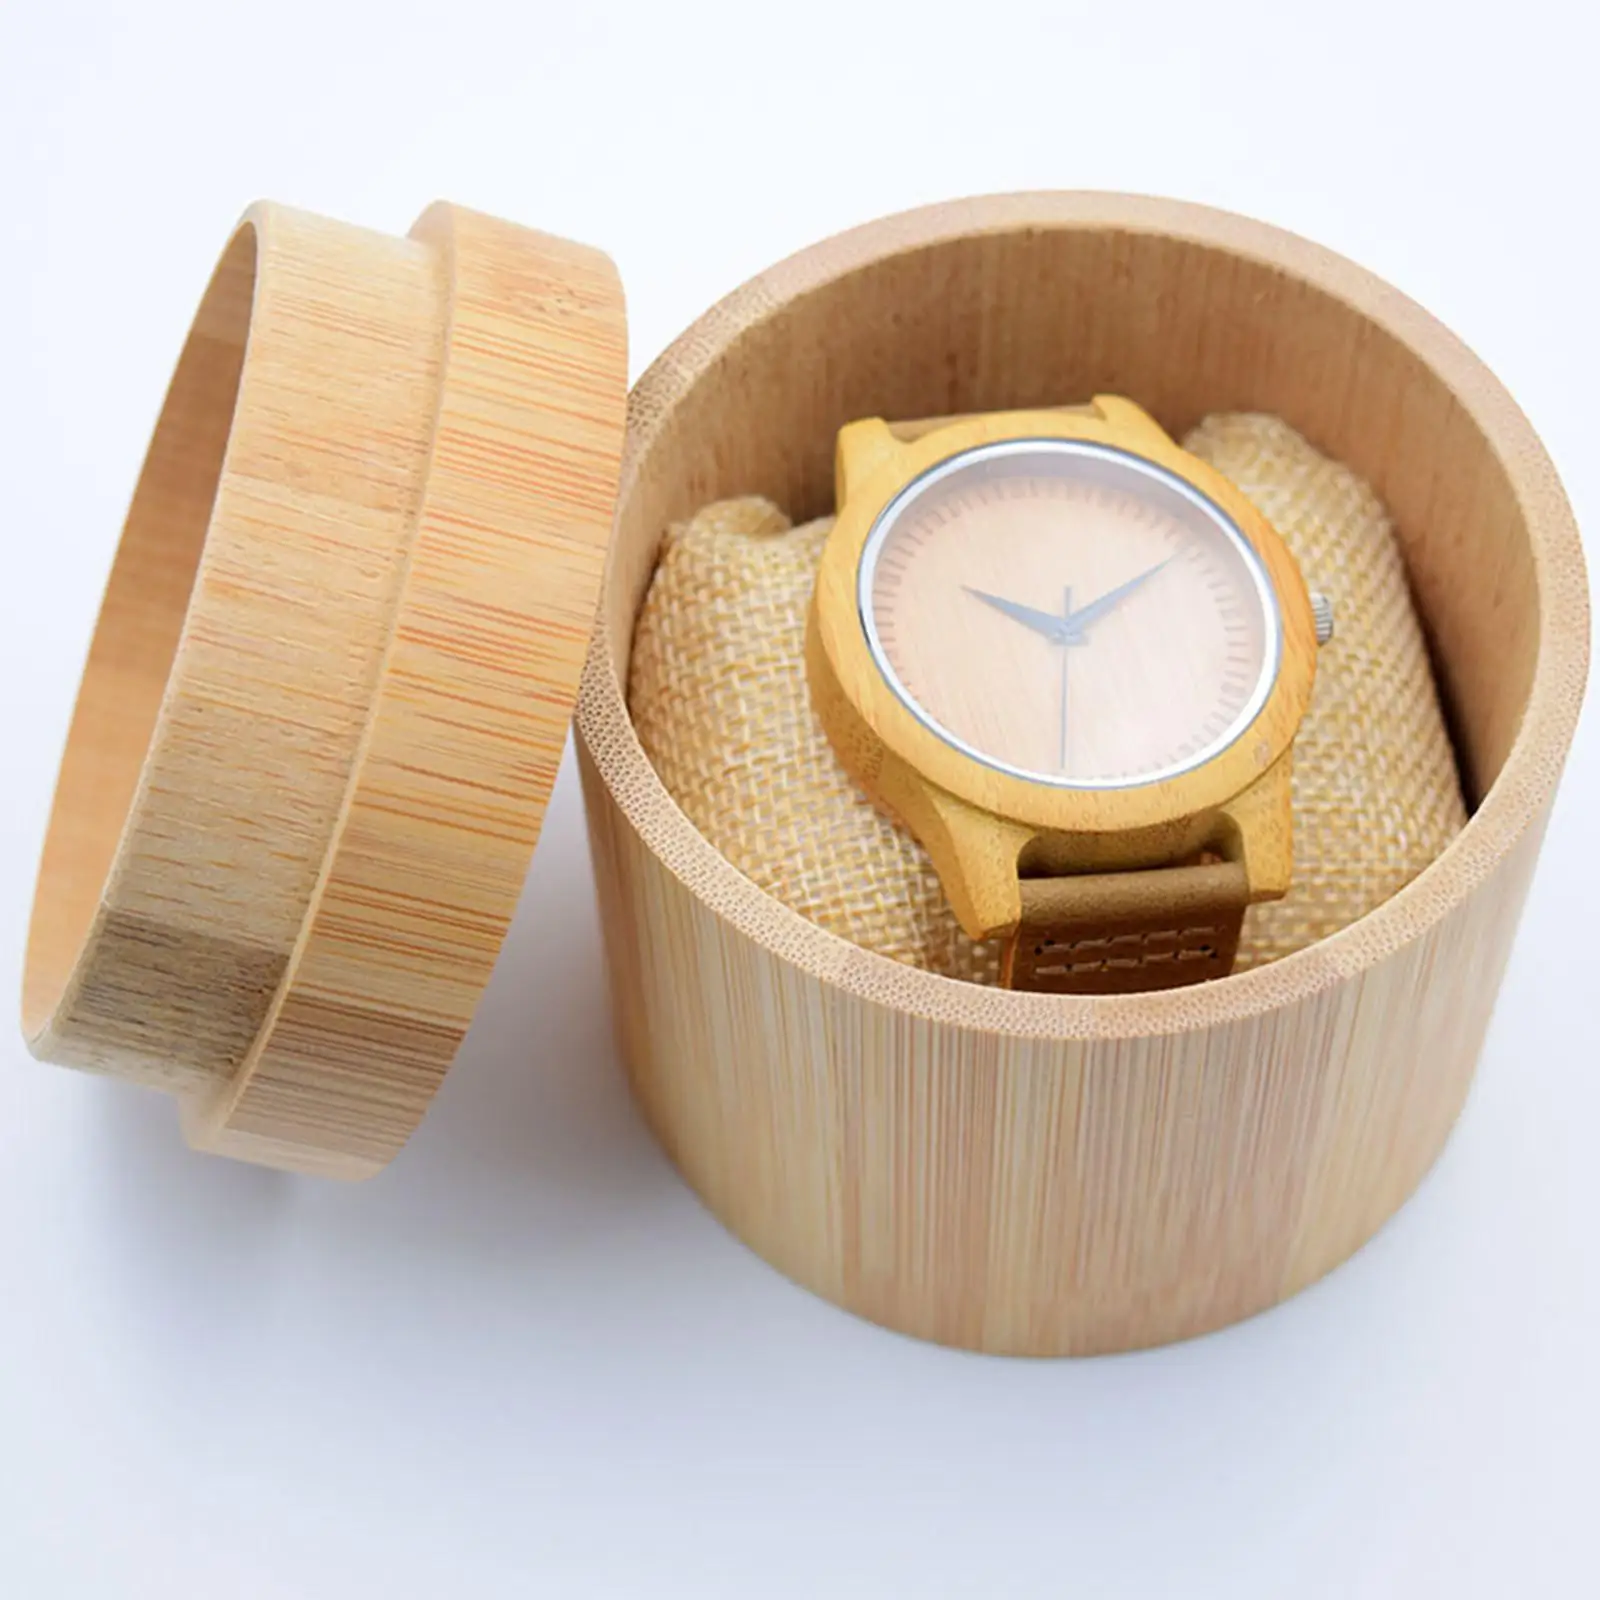 Single Slot Wristwatch Case with Pillow Cylindric for Jewelry Earrings Rings